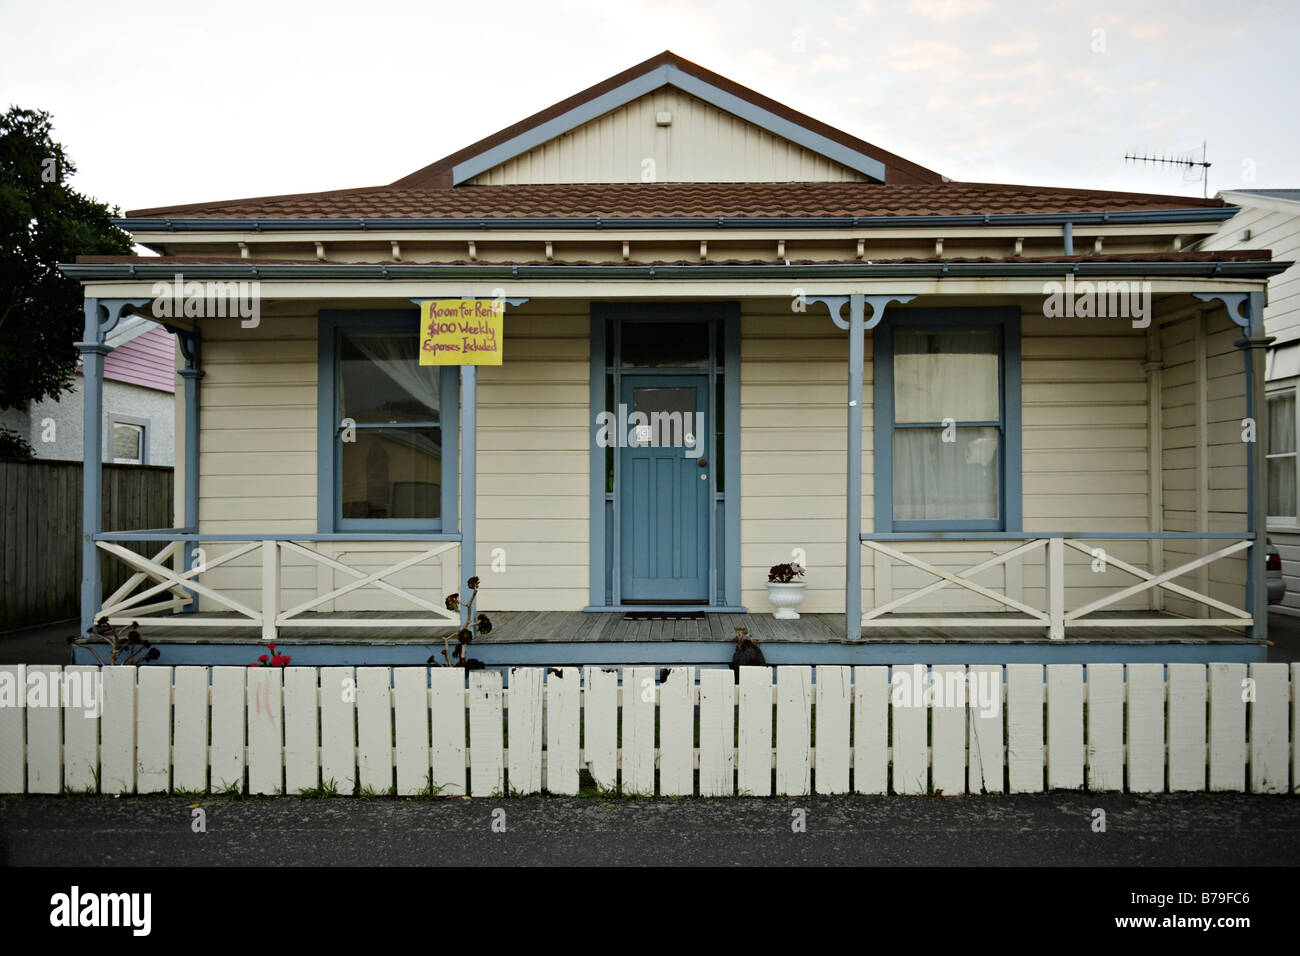 Urban landscape Palmerston North New Zealand Detahced wooden house with room for rent sign 100 per week Stock Photo